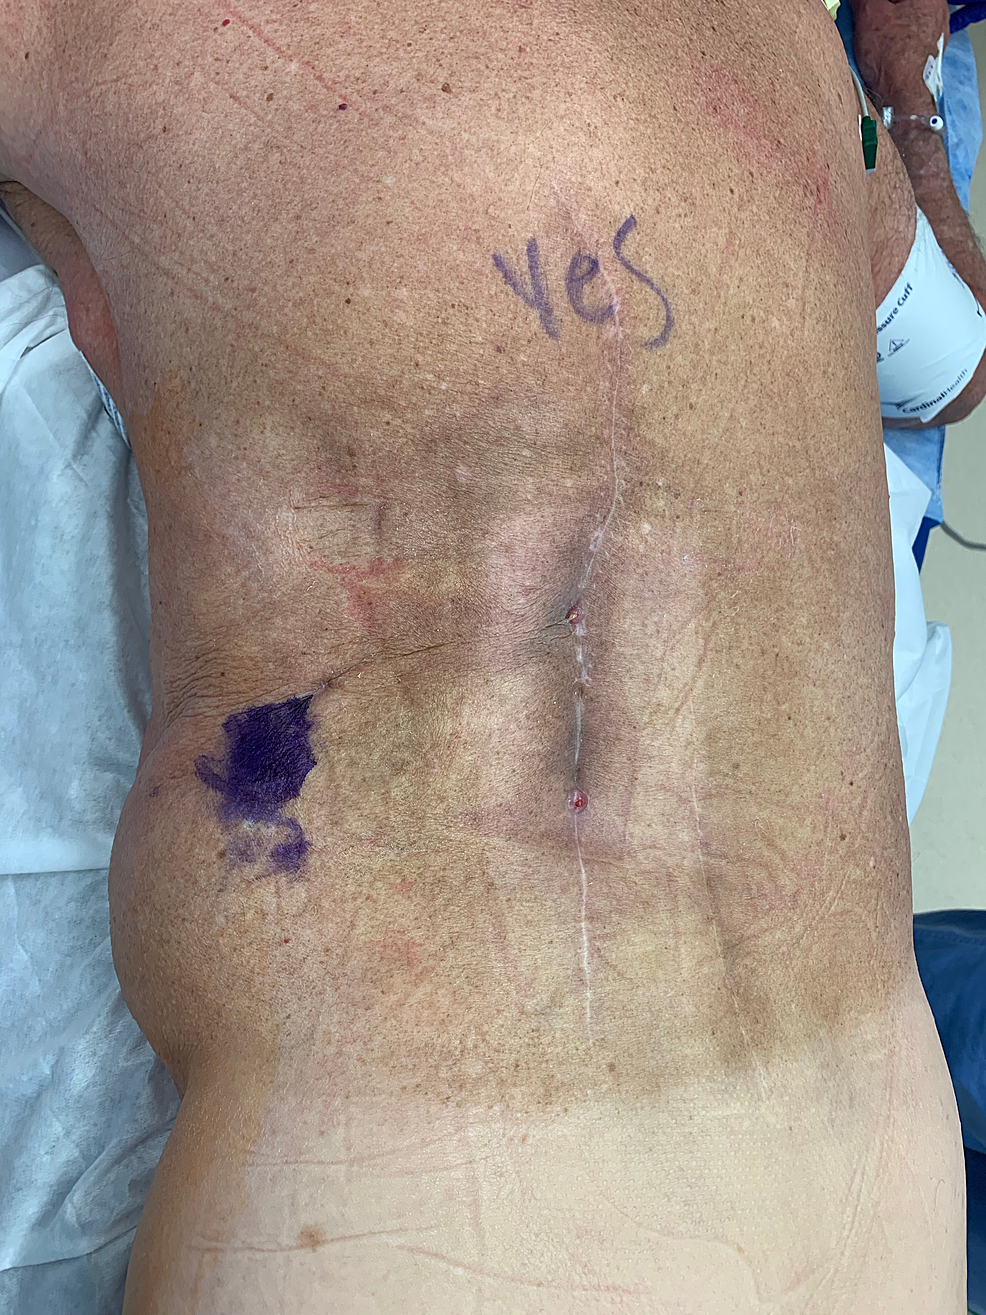 Left-lower-back-wound-showing-previous-incision-and-the-chronic-draining-sinus-in-the-incision.-The-purple-marks-where-the-mental-flap-was-tunneled-posteriorly.-